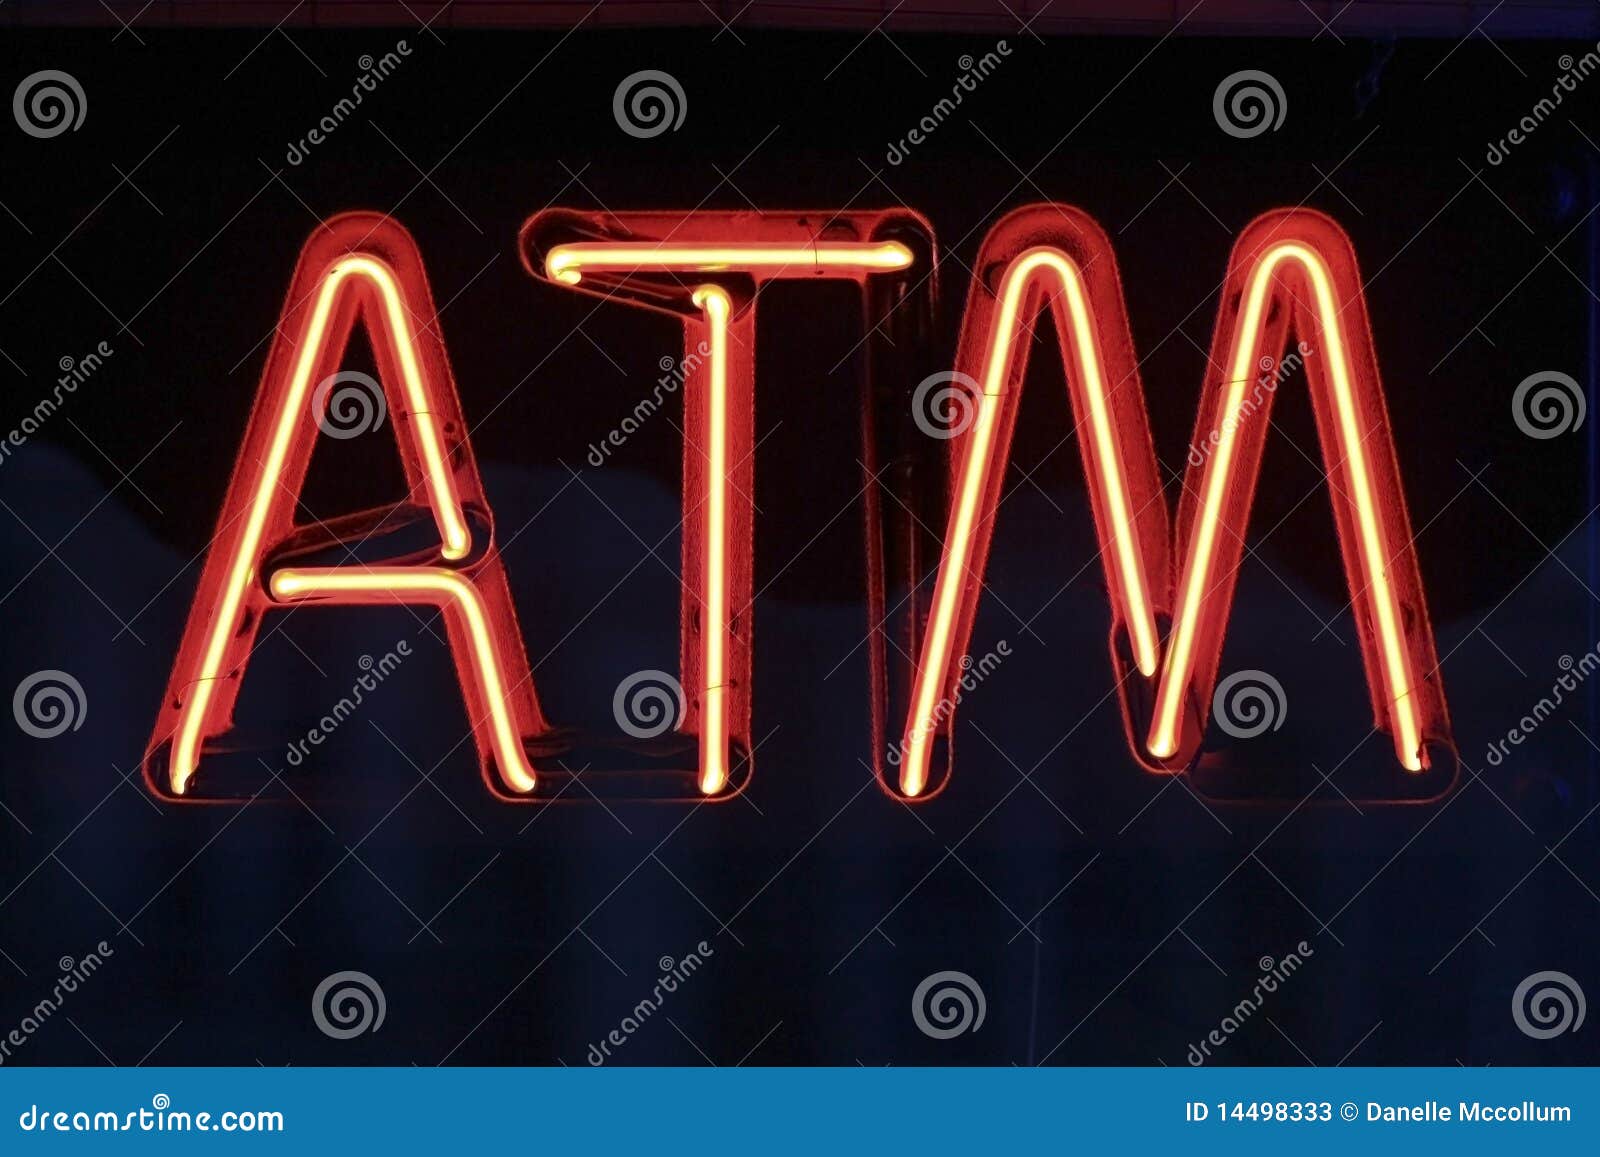 neon atm sign